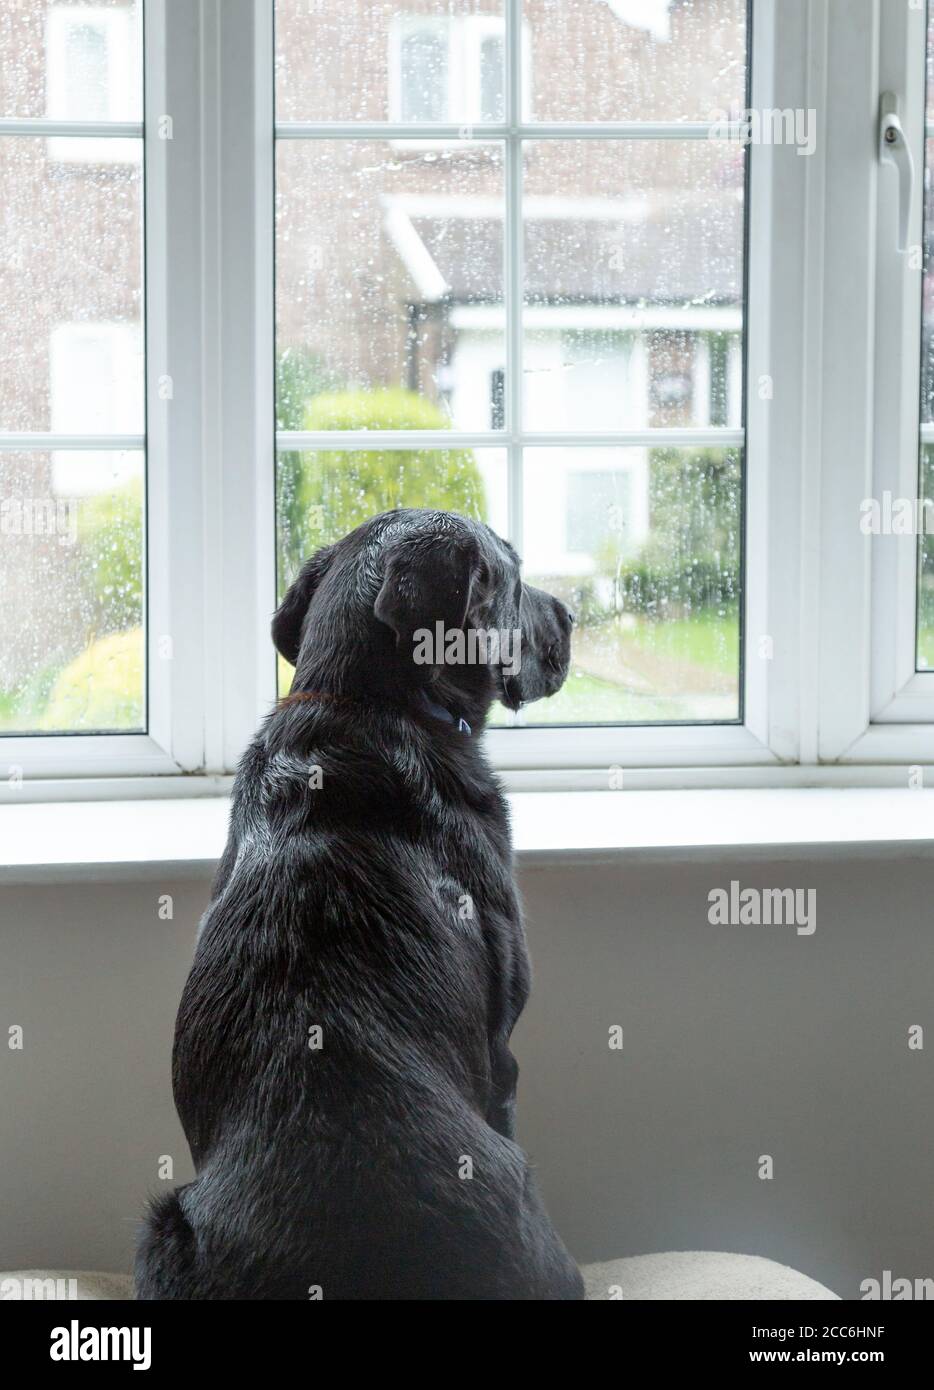 A black labrador retriever sits looking out of a window on a rainy day. Stock Photo